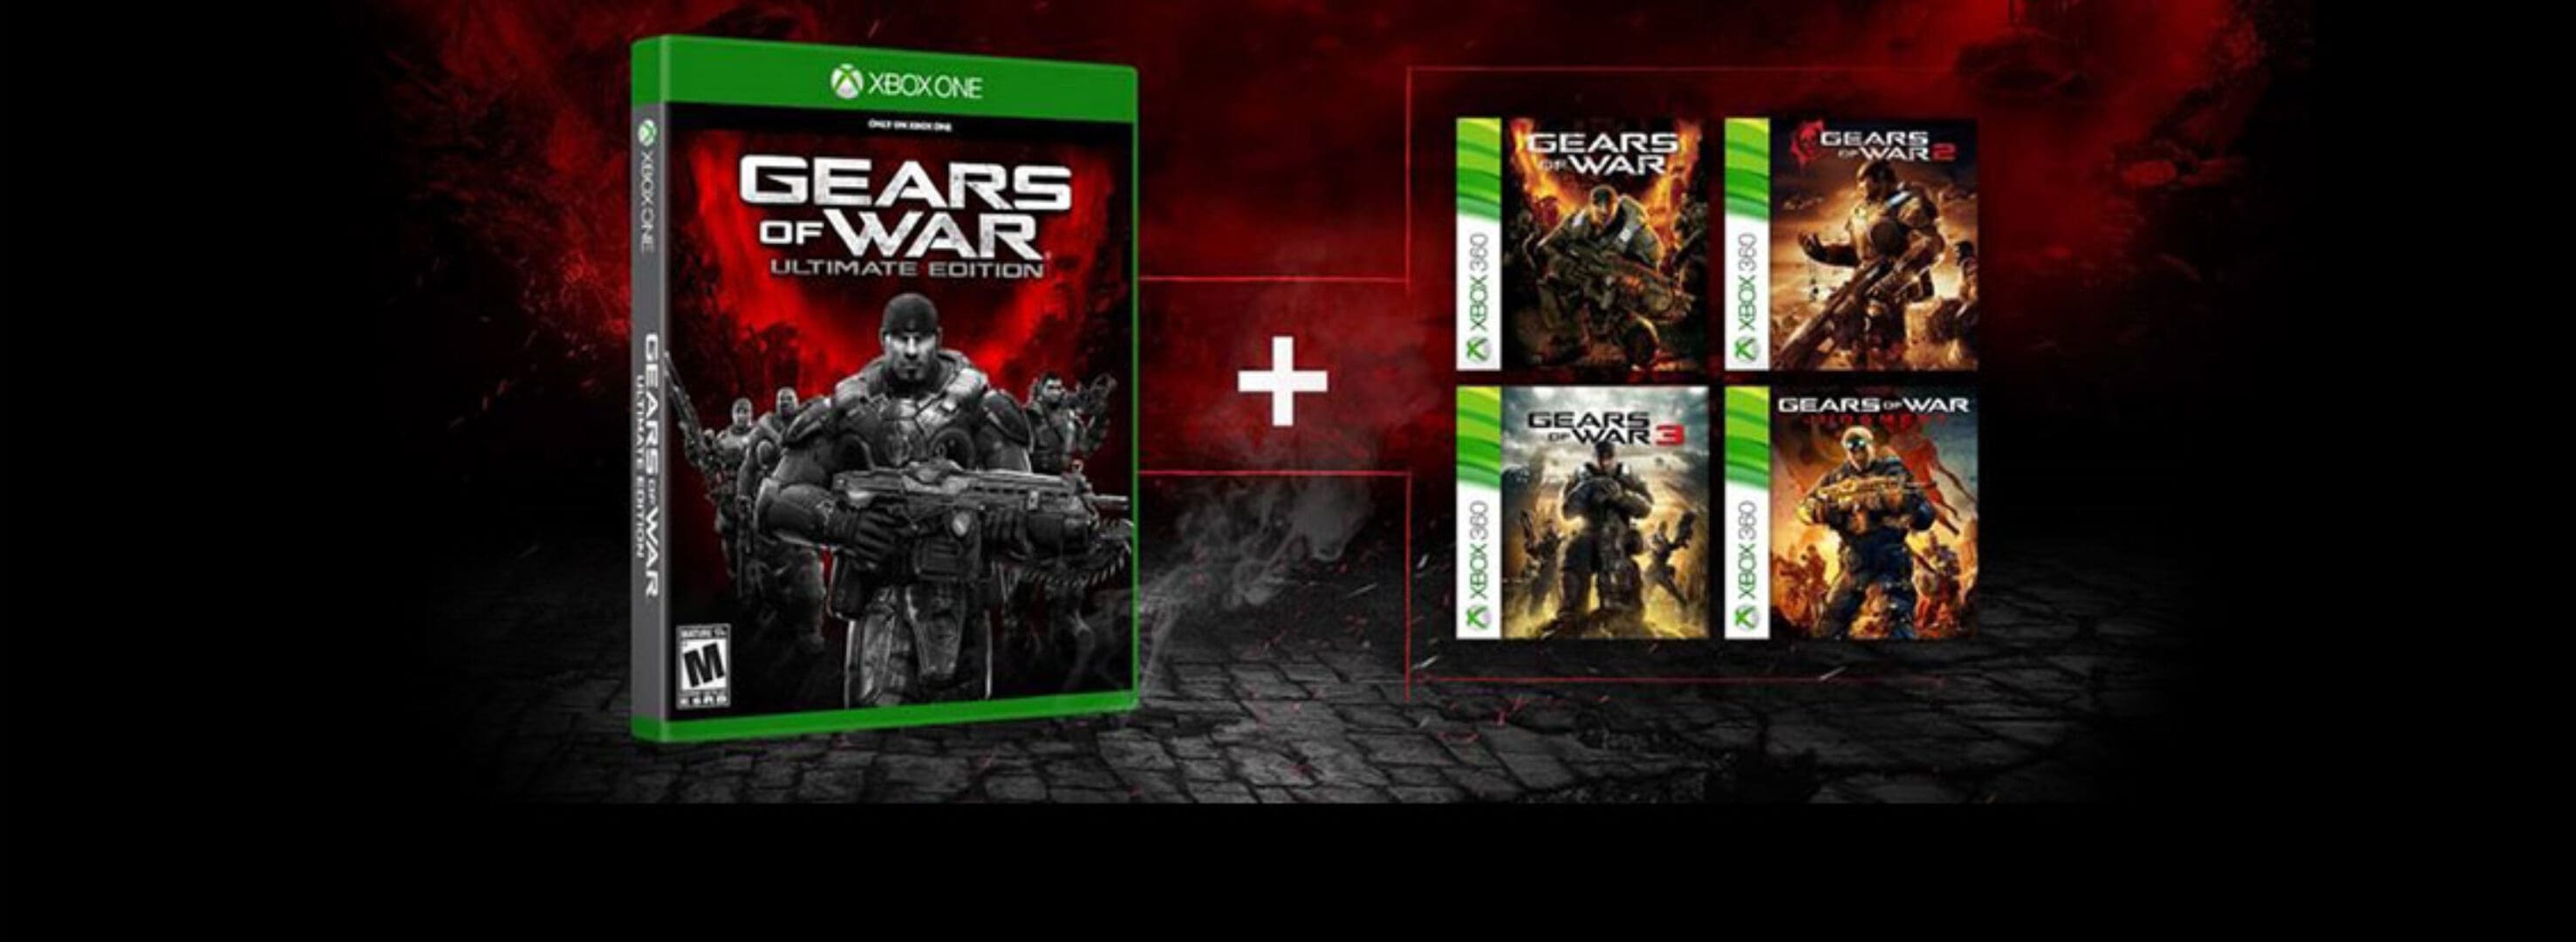 Gears of War Backwards Compatibility News Announced